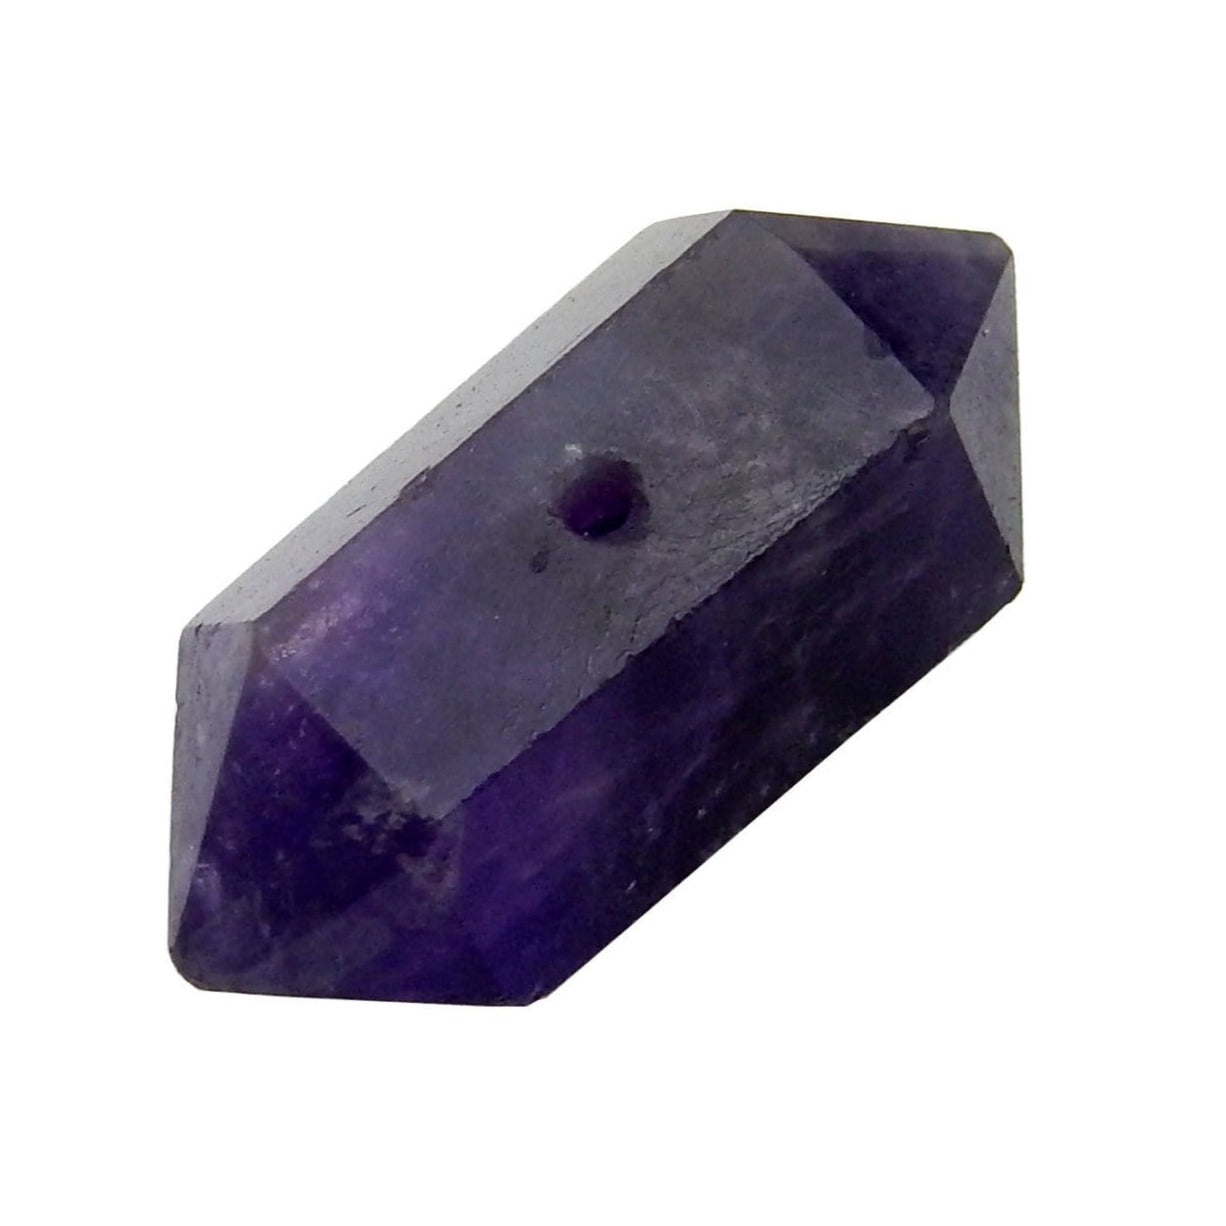 up close of amethyst bead showing drill center